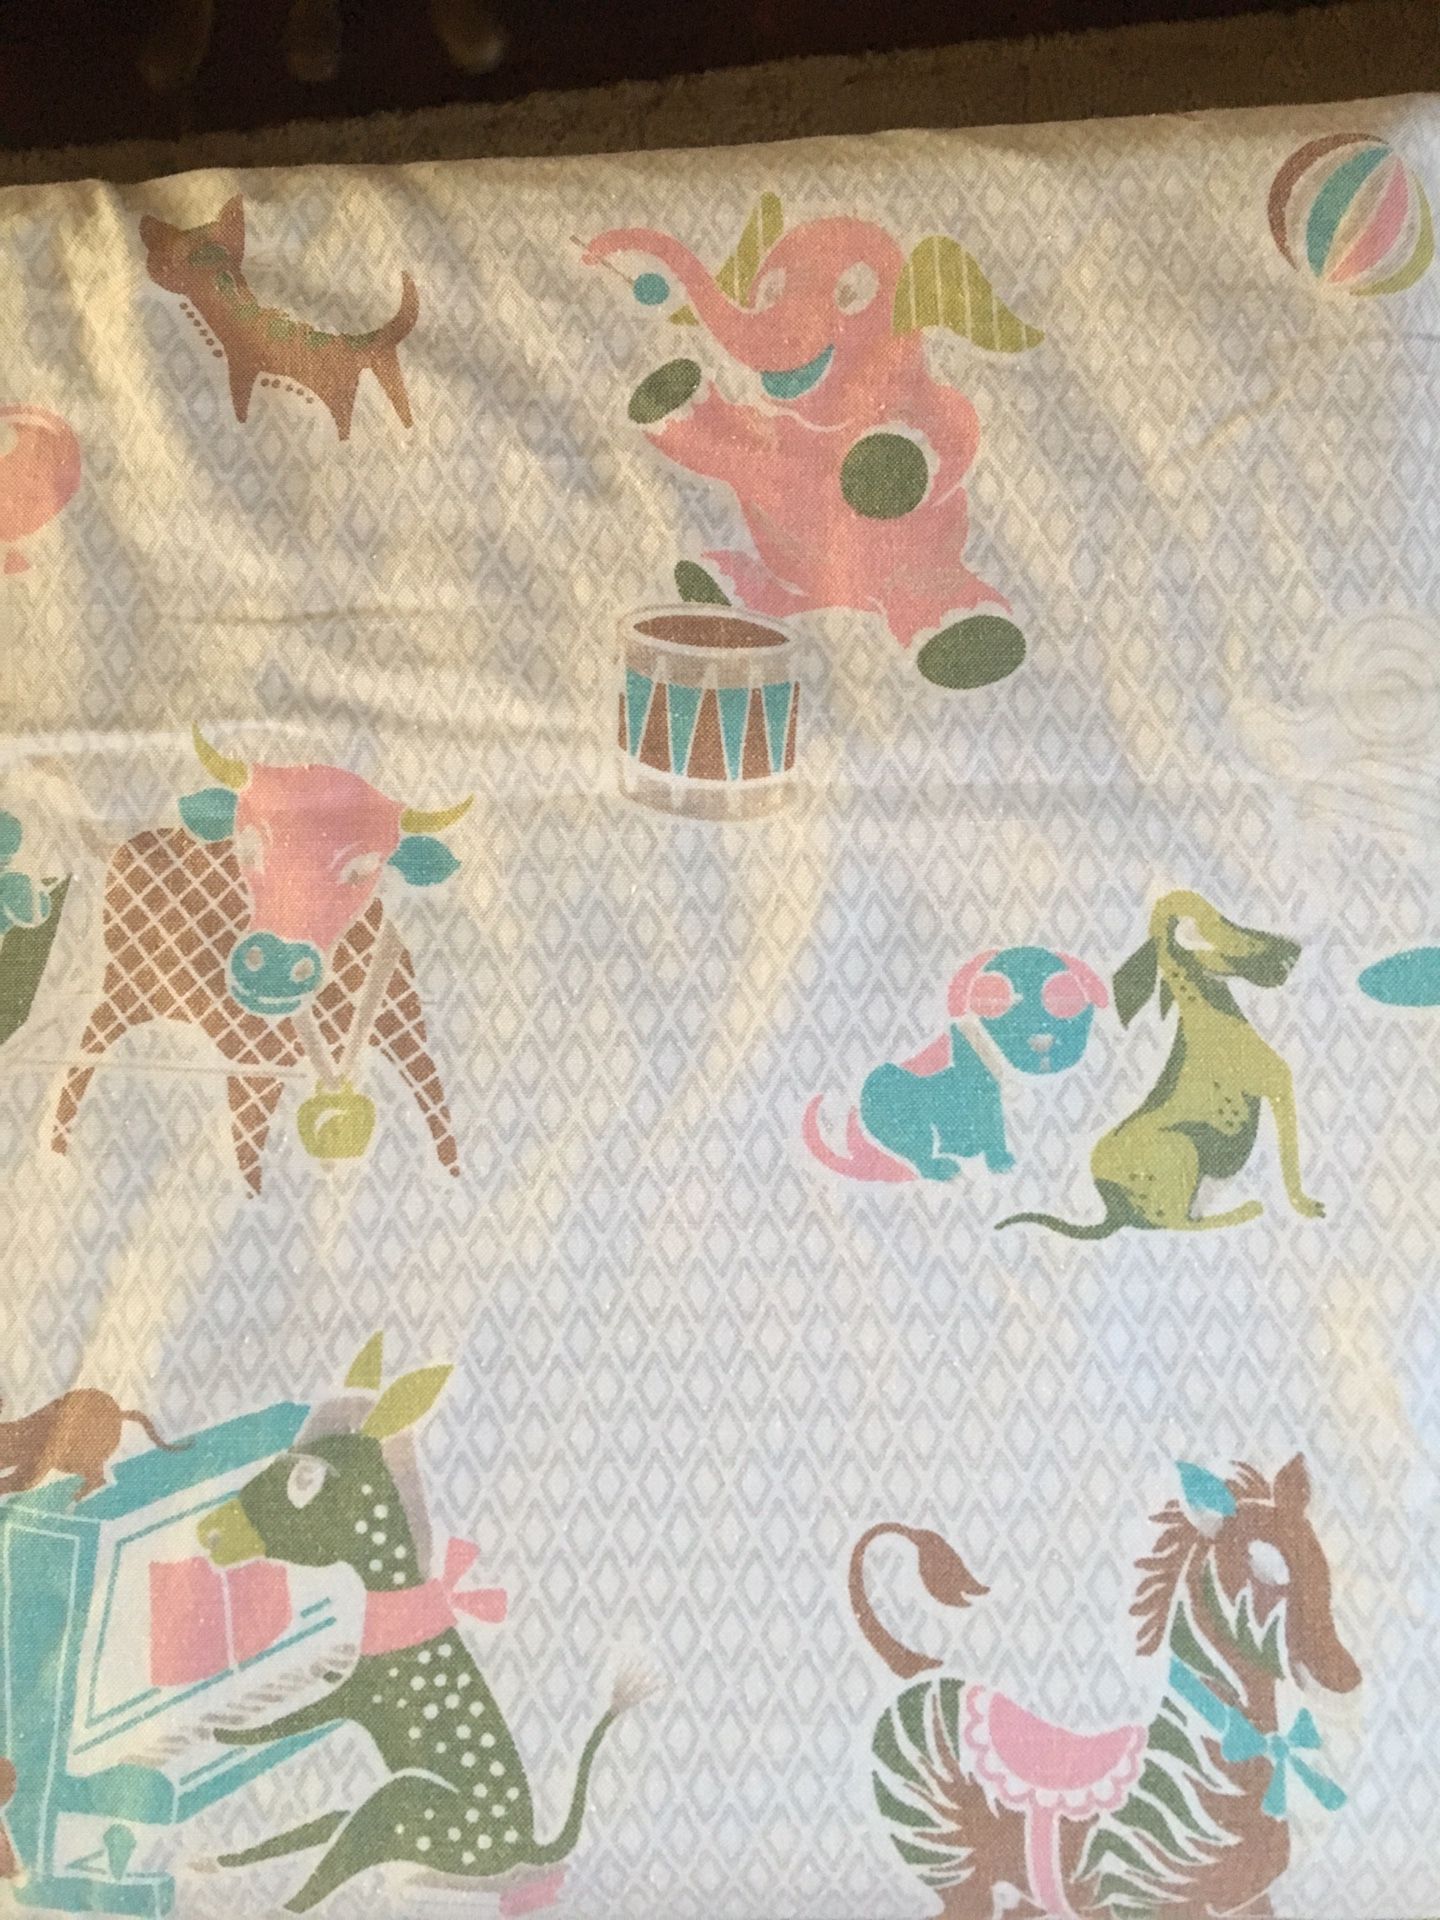 Vintage Baby Crib Sheets - Perfect for Nursery Curtains